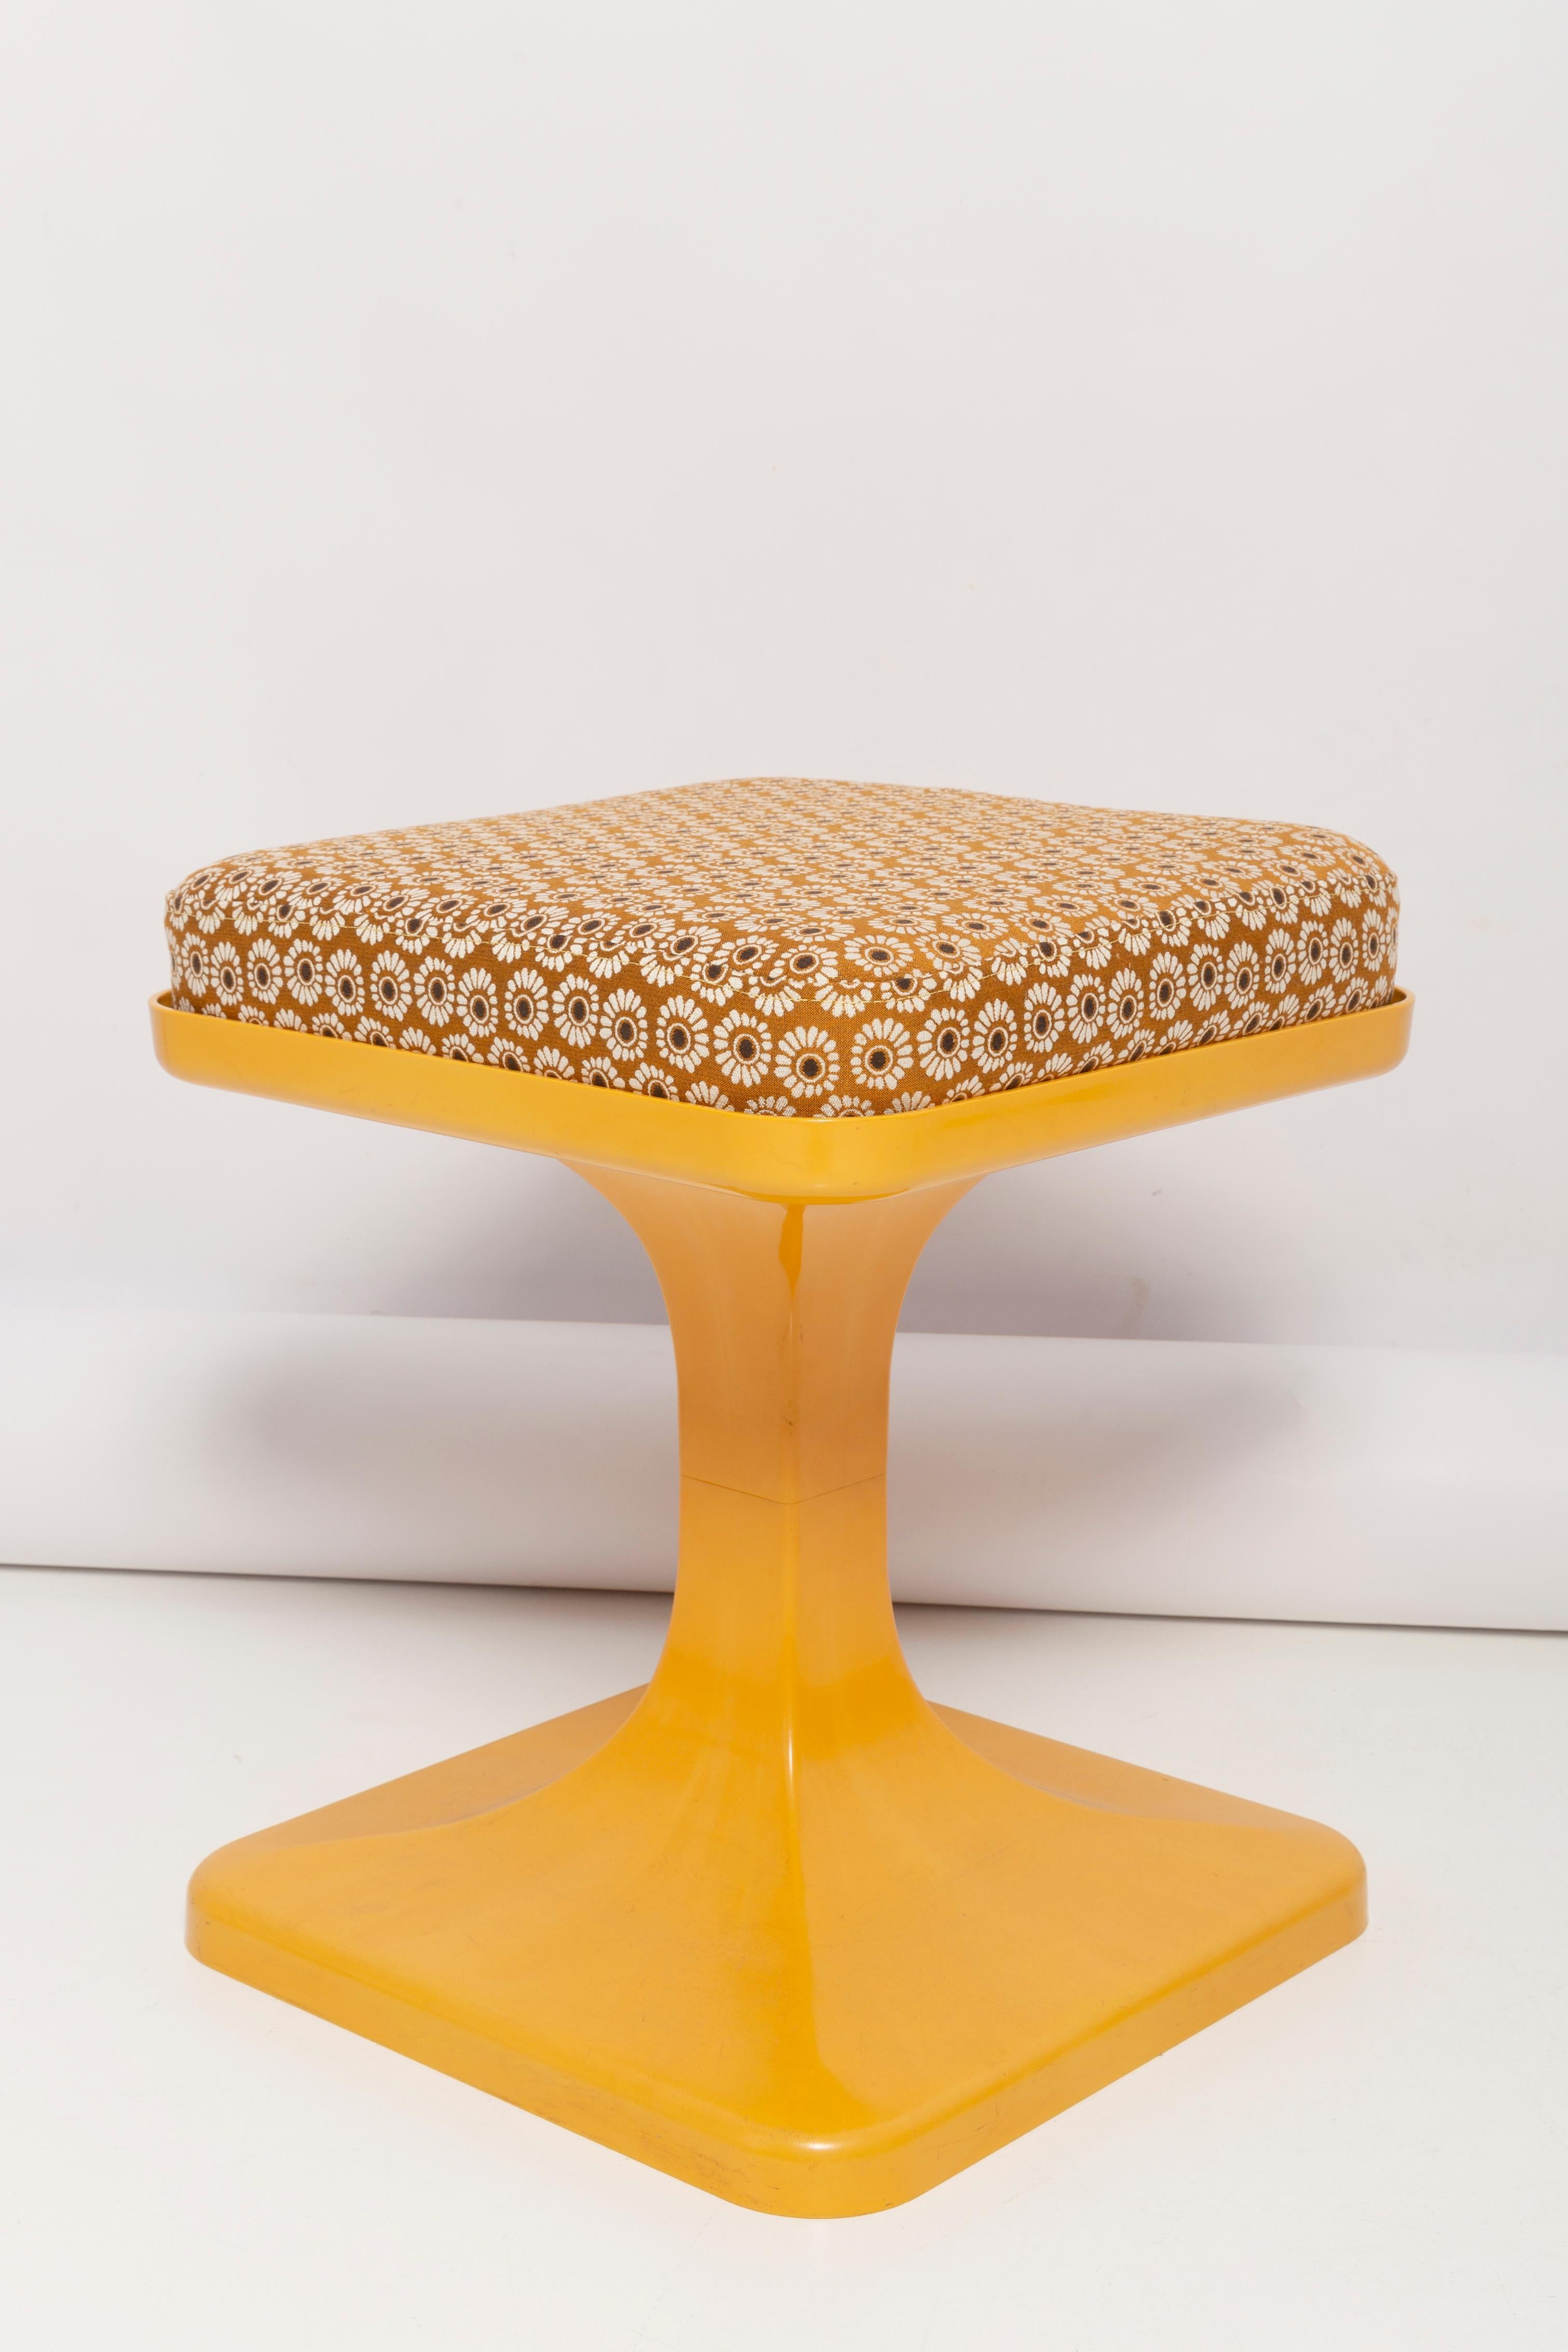 Space Age style plastic stool was made in Poland by Krynwald ERG fabric around the 1960s-1970s. The futuristic shape is tapered and aerodynamic, with a tulip foot and an yellow mustard color. This original piece in hard plastic imitates the texture